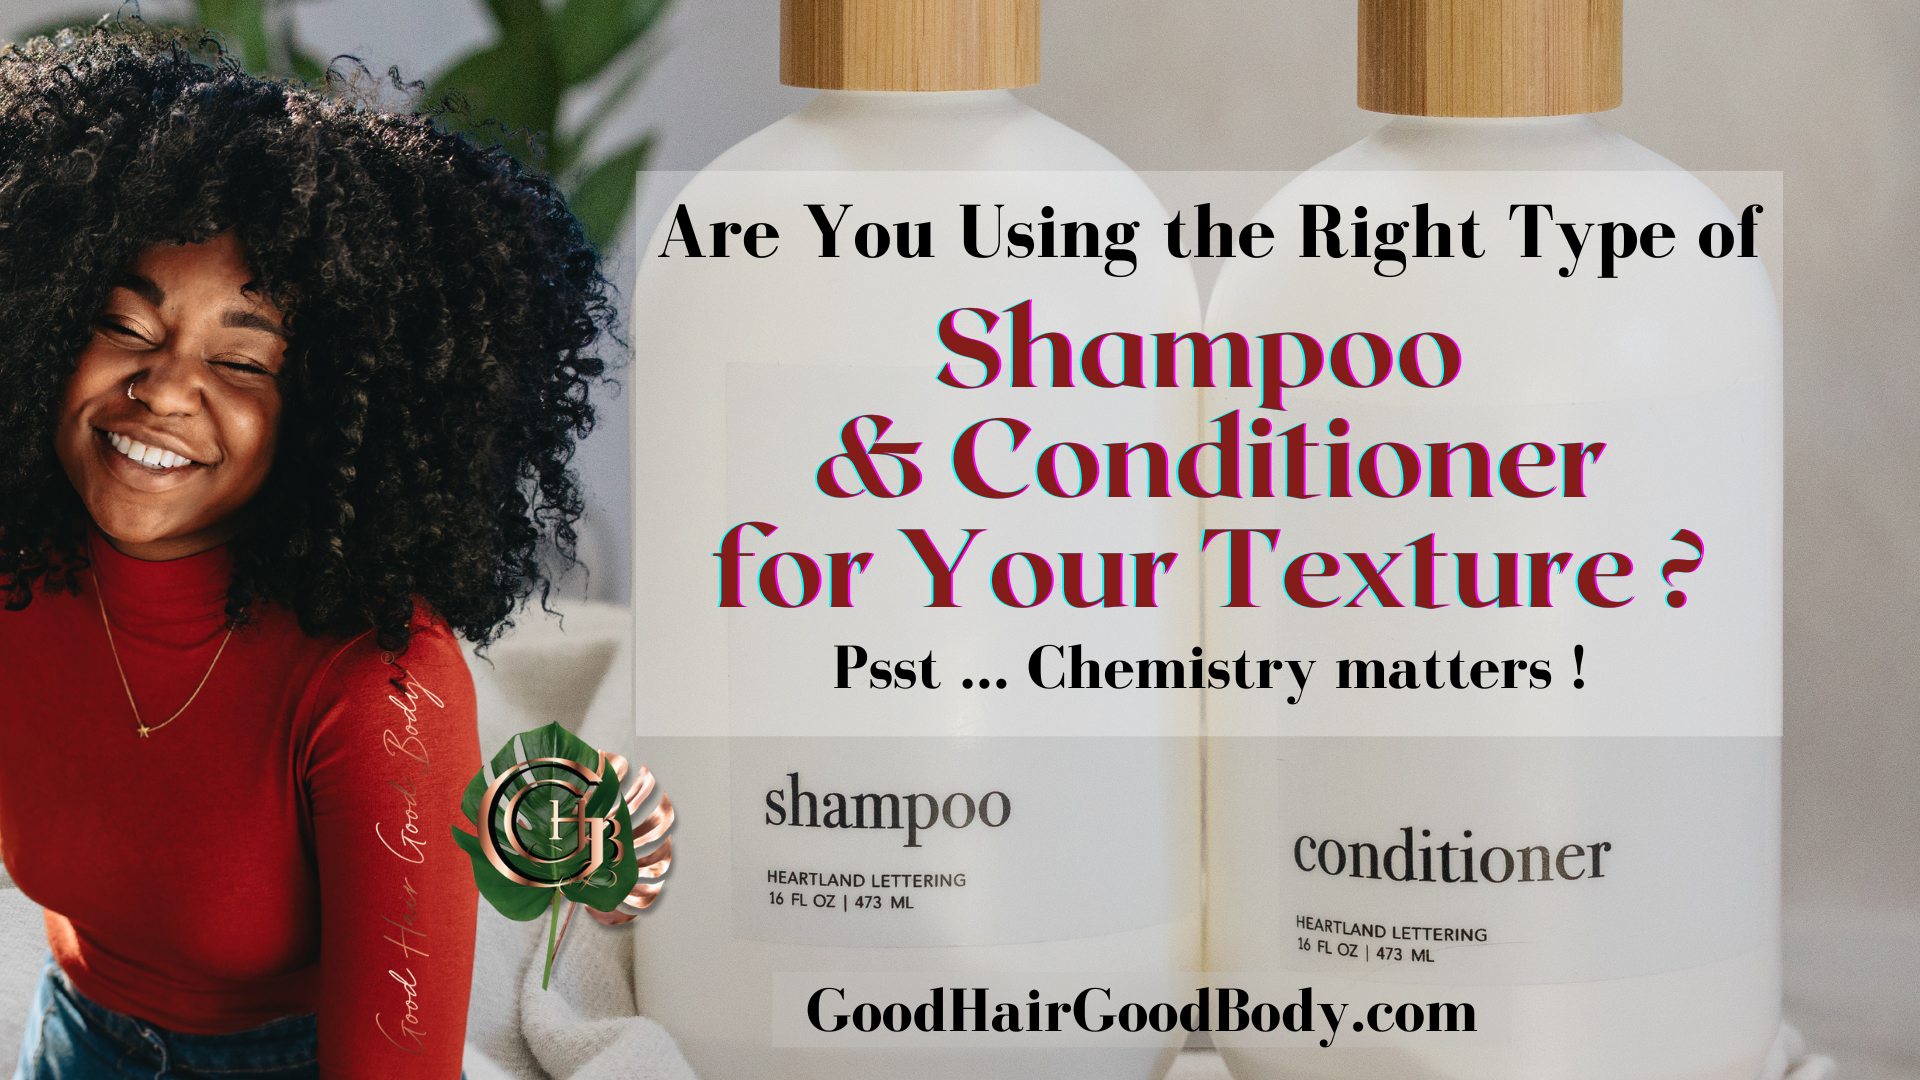 Are You Using the Right Shampoo & Conditioner for Your Texture ? (5-mi -  Good Hair Good Body